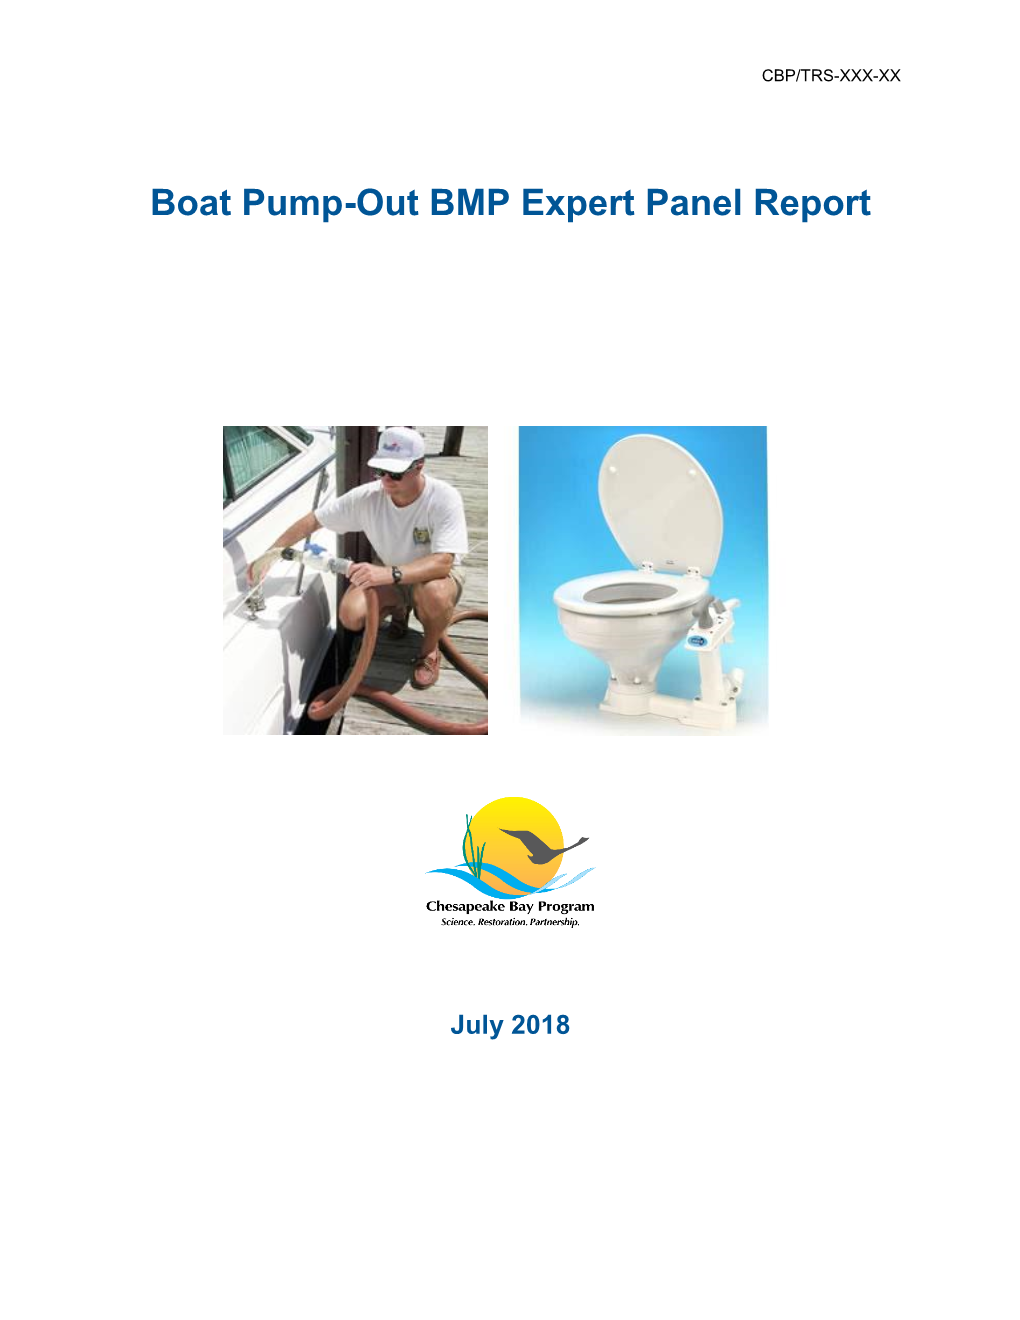 Boat Pump-Out BMP Expert Panel Report